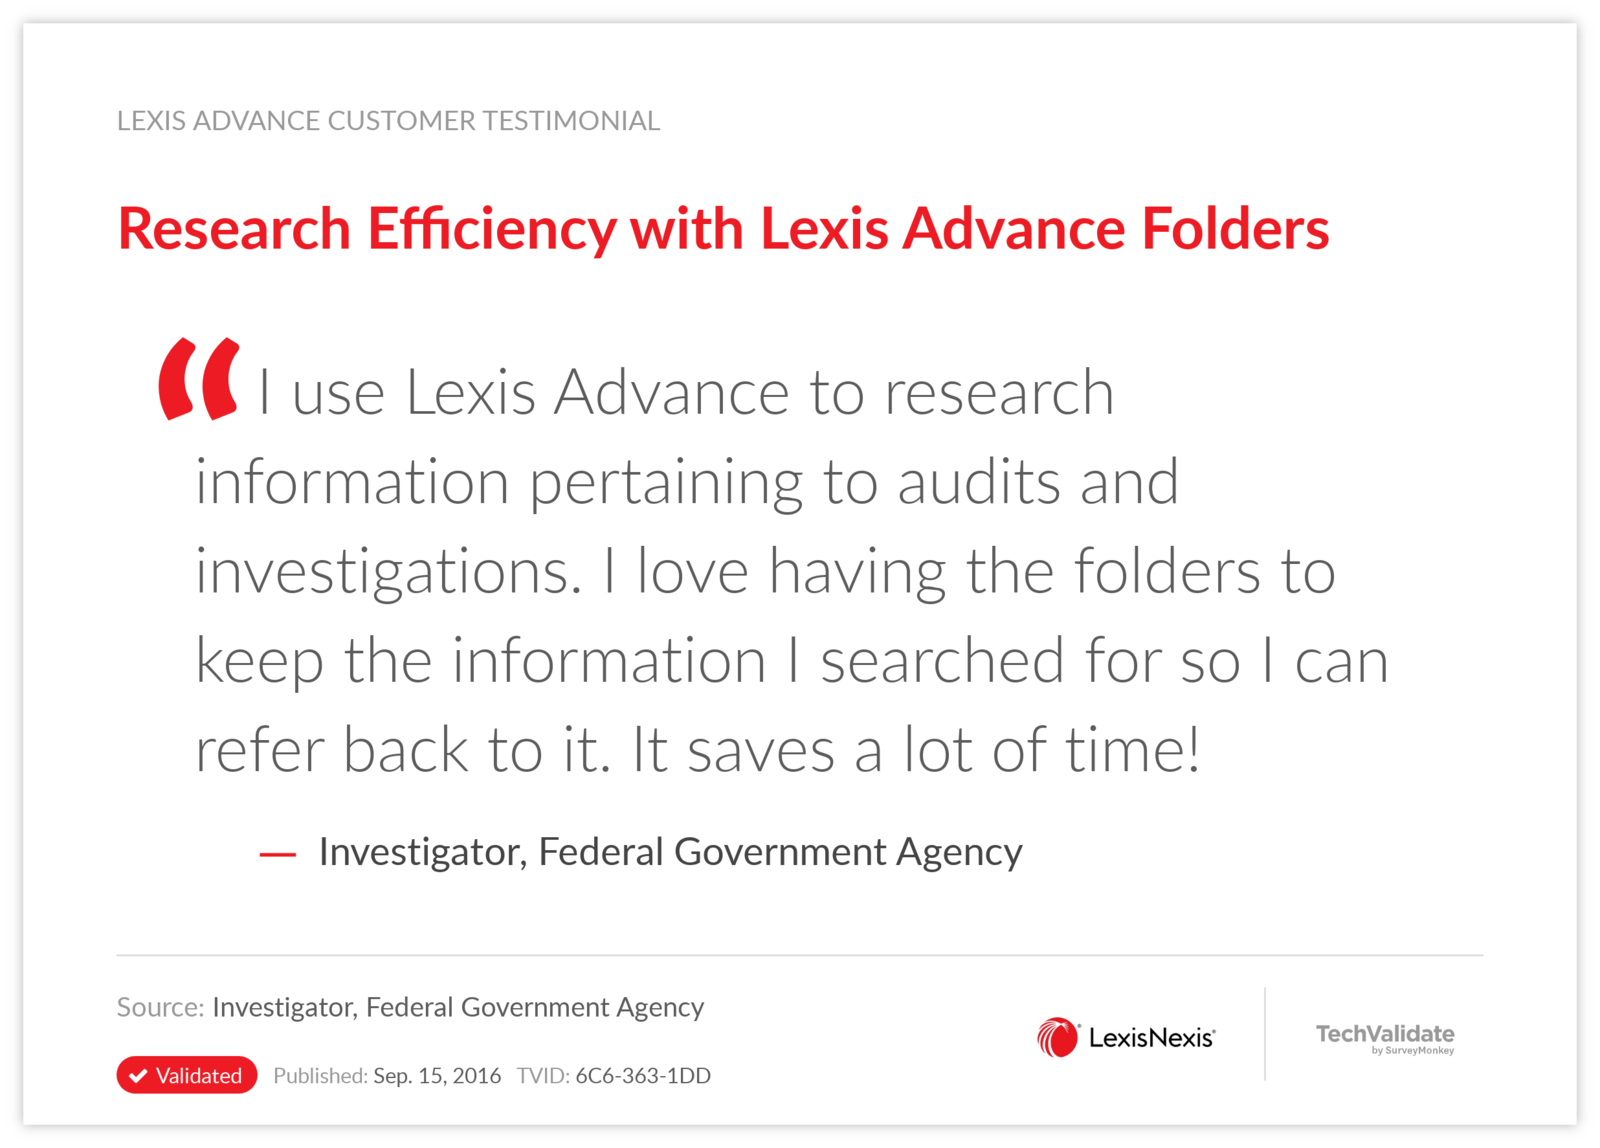 Research Efficiency with Lexis Advance Folders